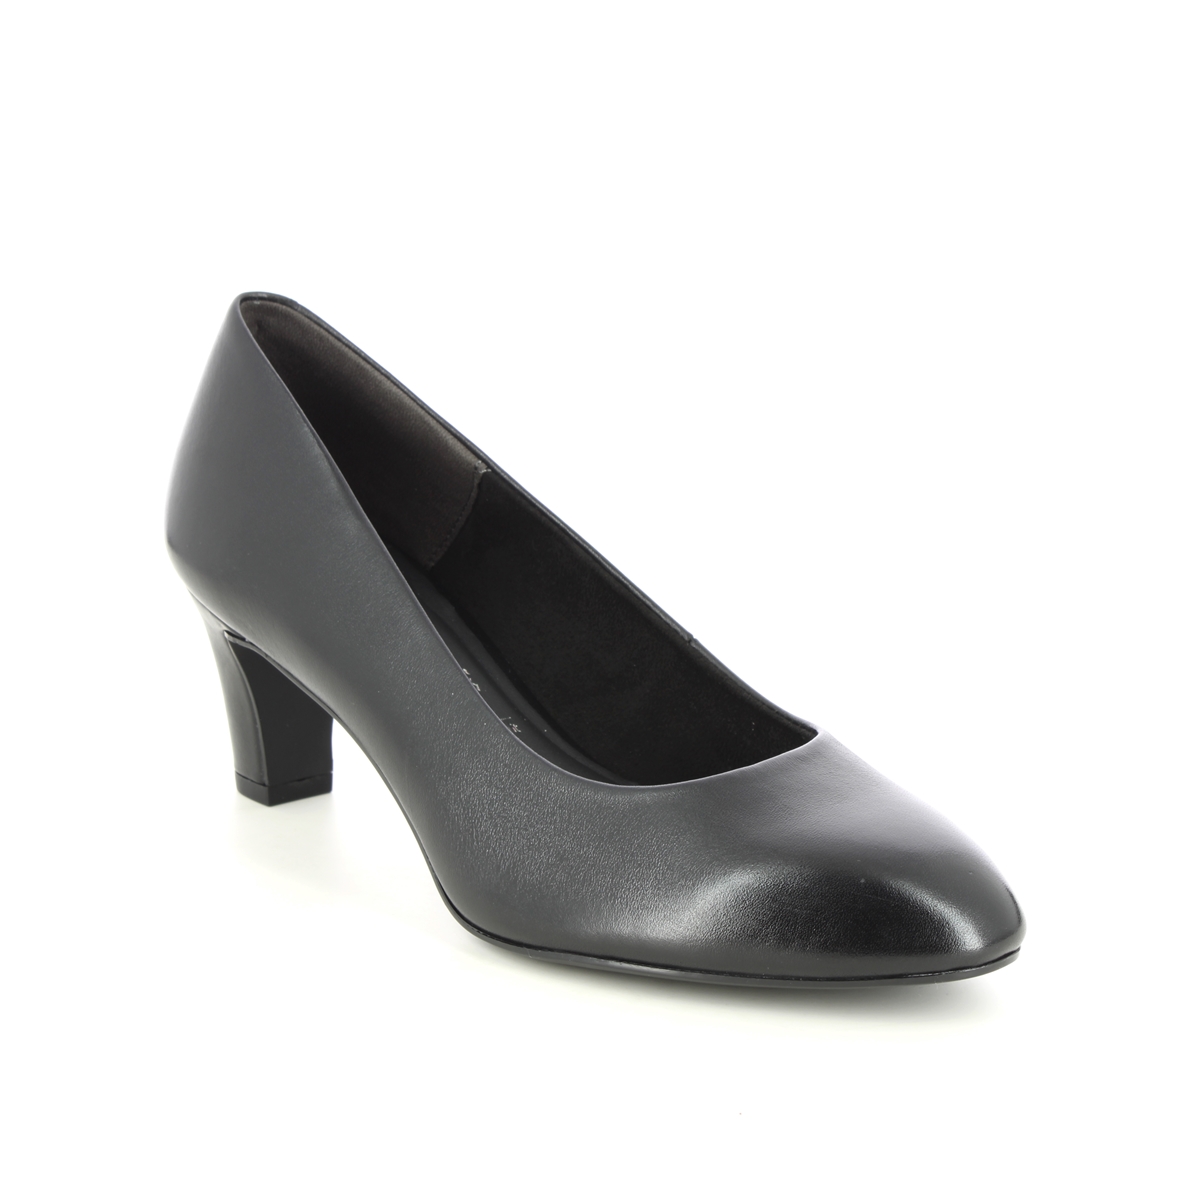 Tamaris Daenerys Black leather Womens Court Shoes 22420-42-001 in a Plain Leather in Size 40